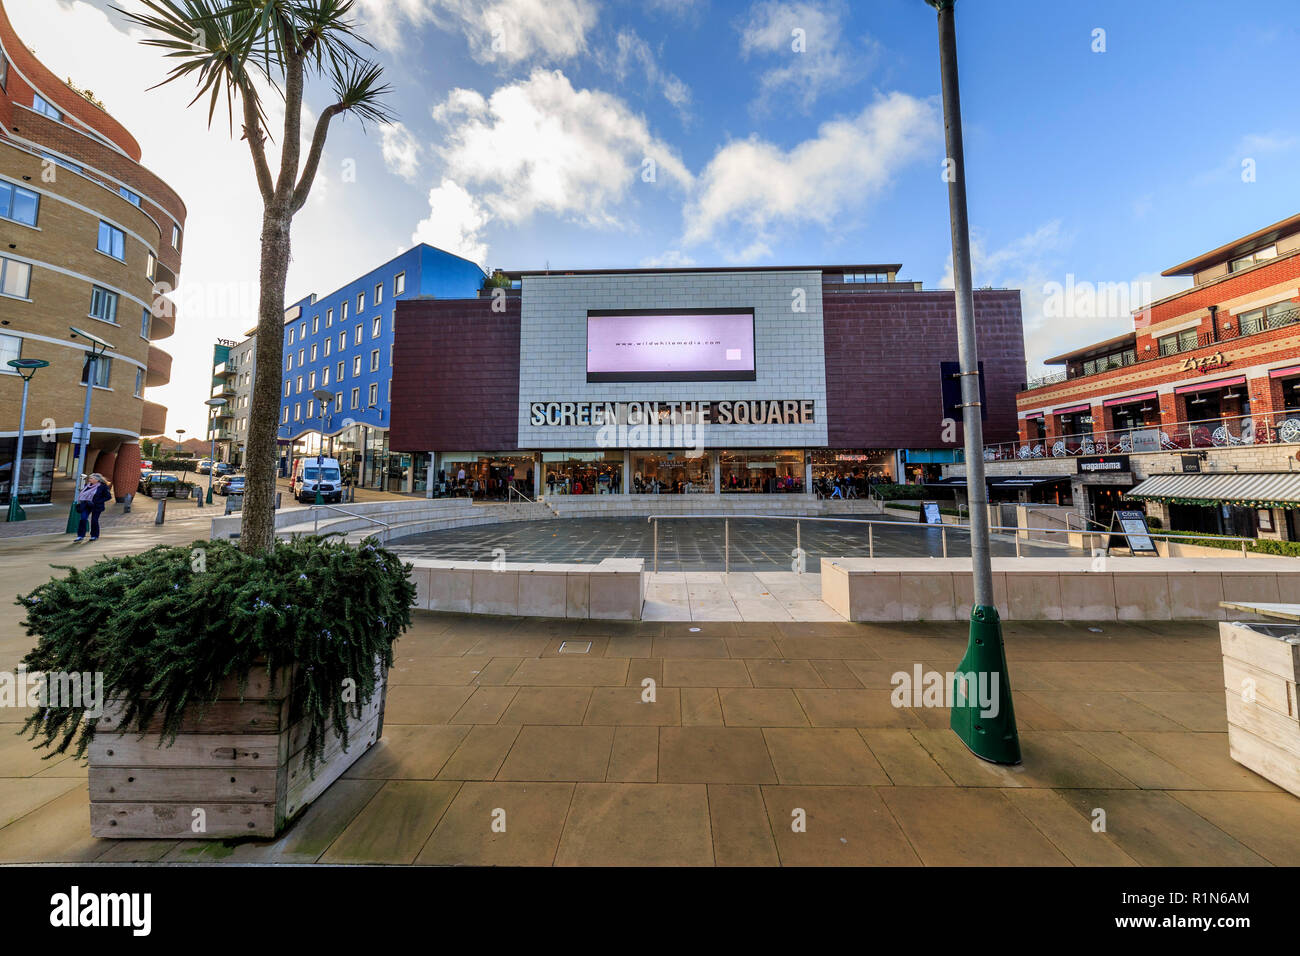 odeon screen on the square cinema,dorchester brewery square redevelopment site , dorchester county town, dorset, england, uk Stock Photo